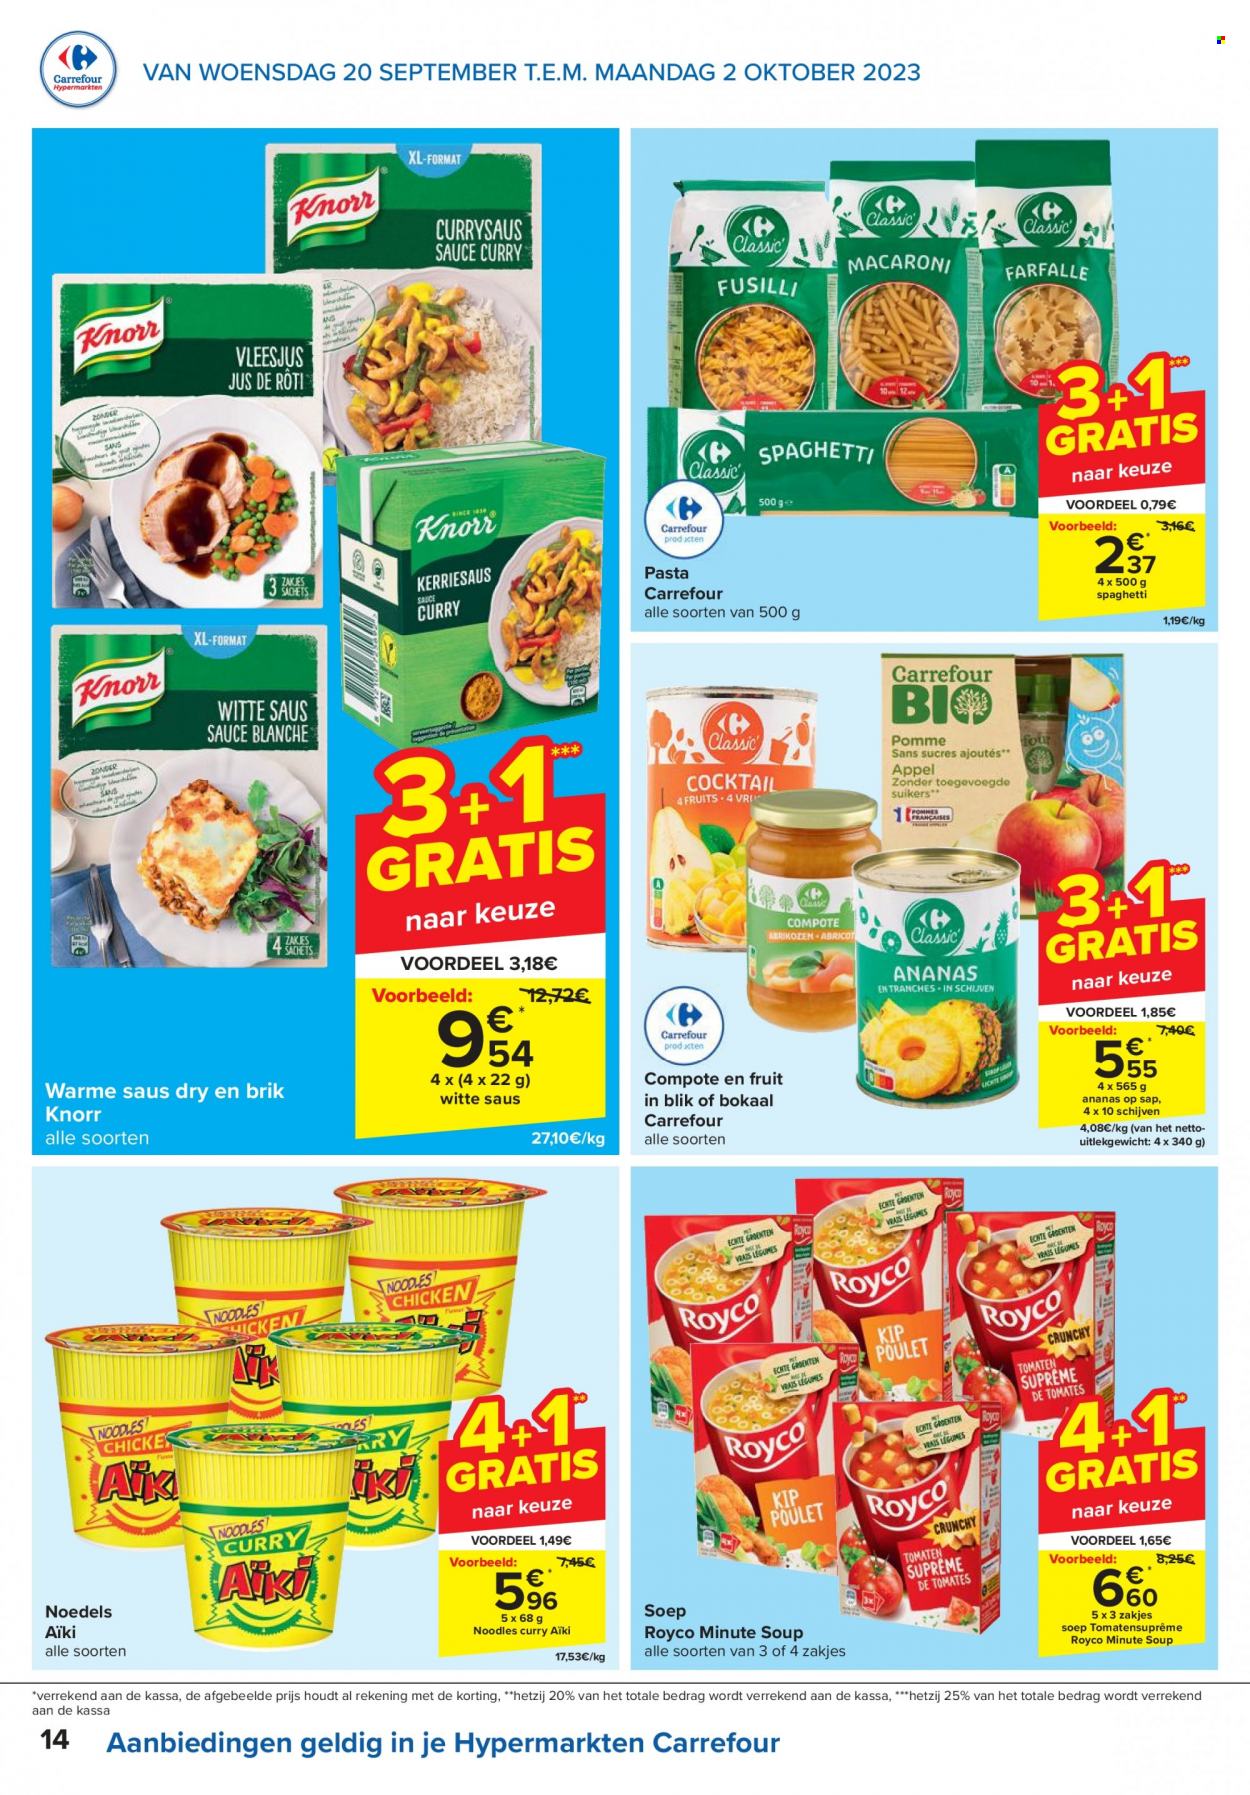 Catalogue Carrefour hypermarkt - 20.9.2023 - 2.10.2023. Page 14.